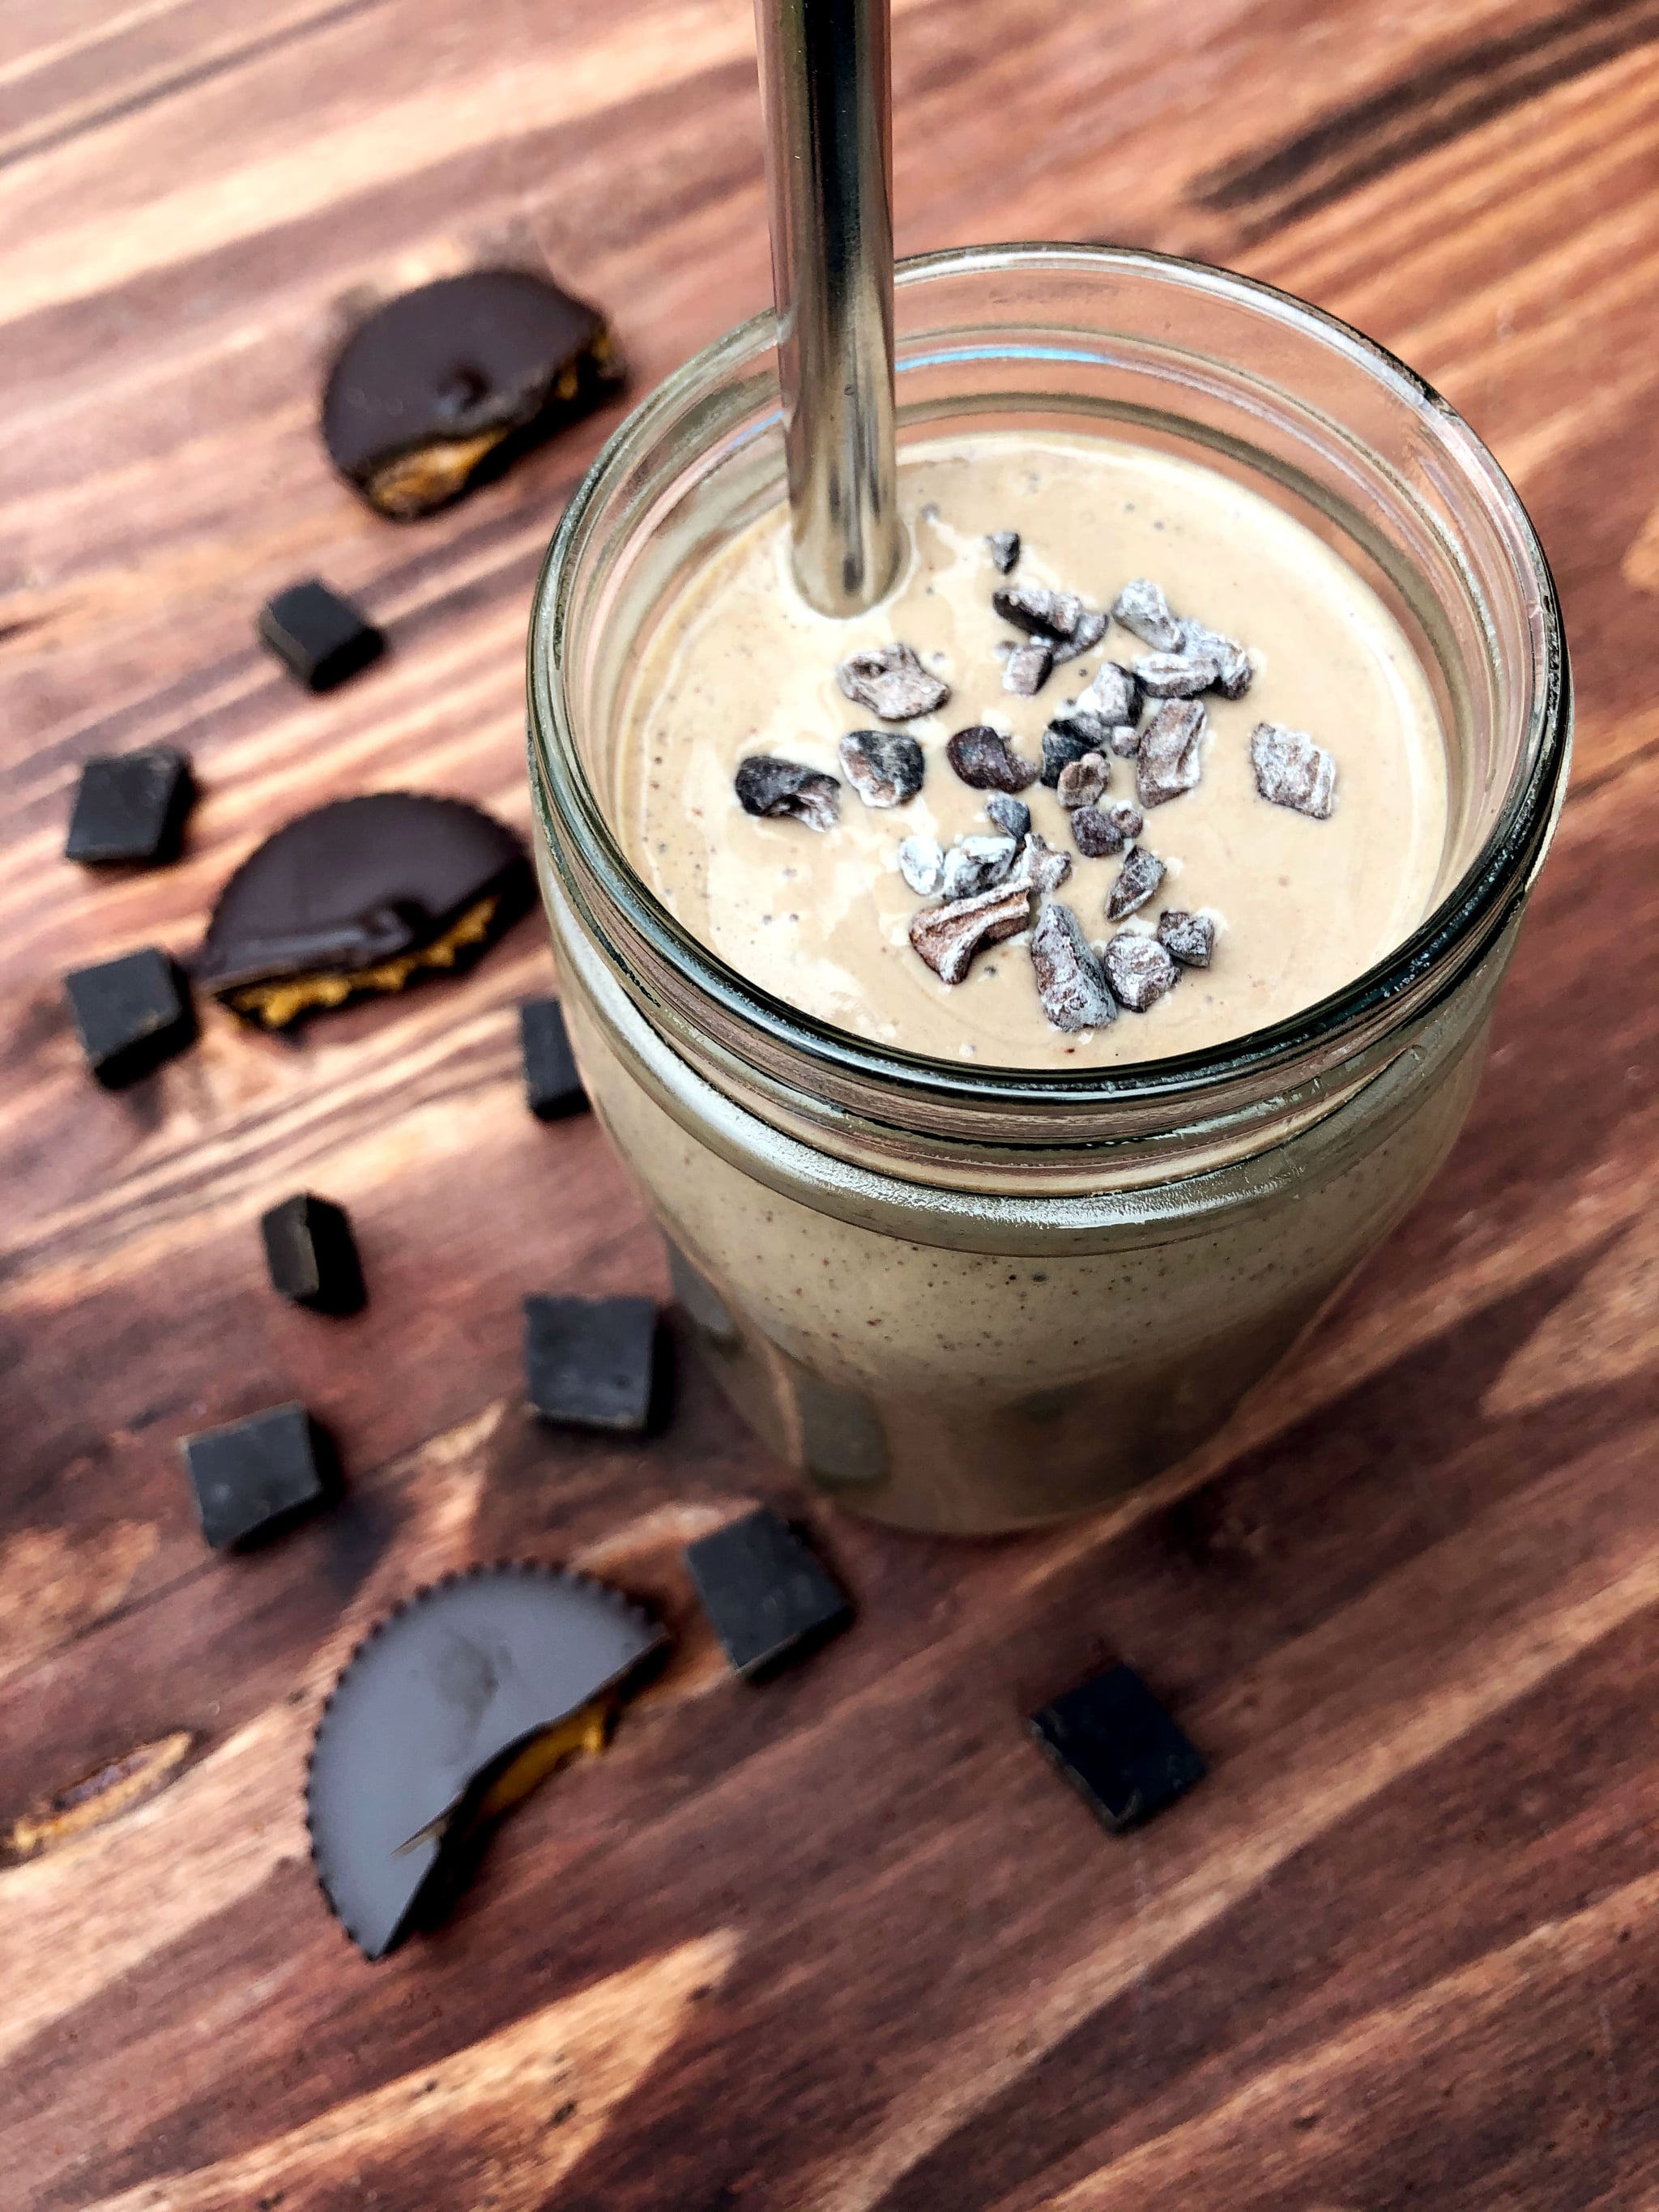 Peanut Butter Cup Protein Smoothie - Nutrisystem Recipe 